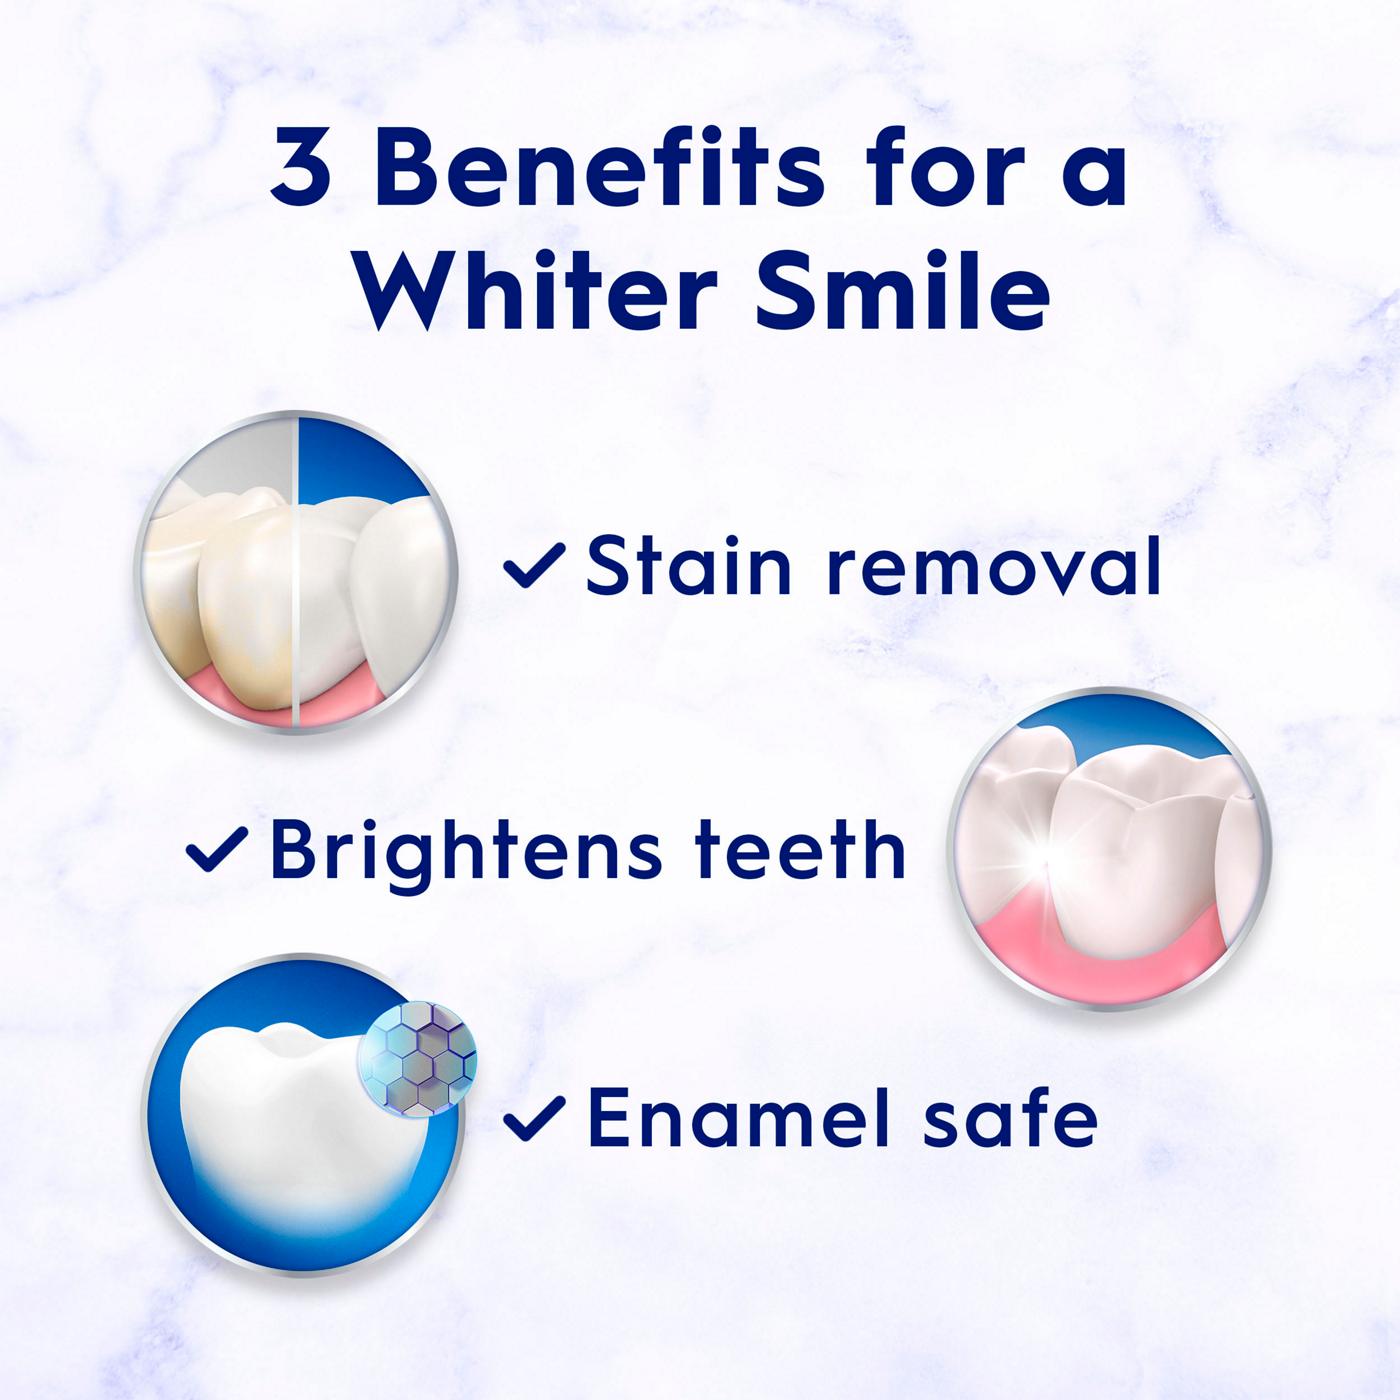 Crest 3D White Advanced Whitening Toothpaste - Express White; image 4 of 16